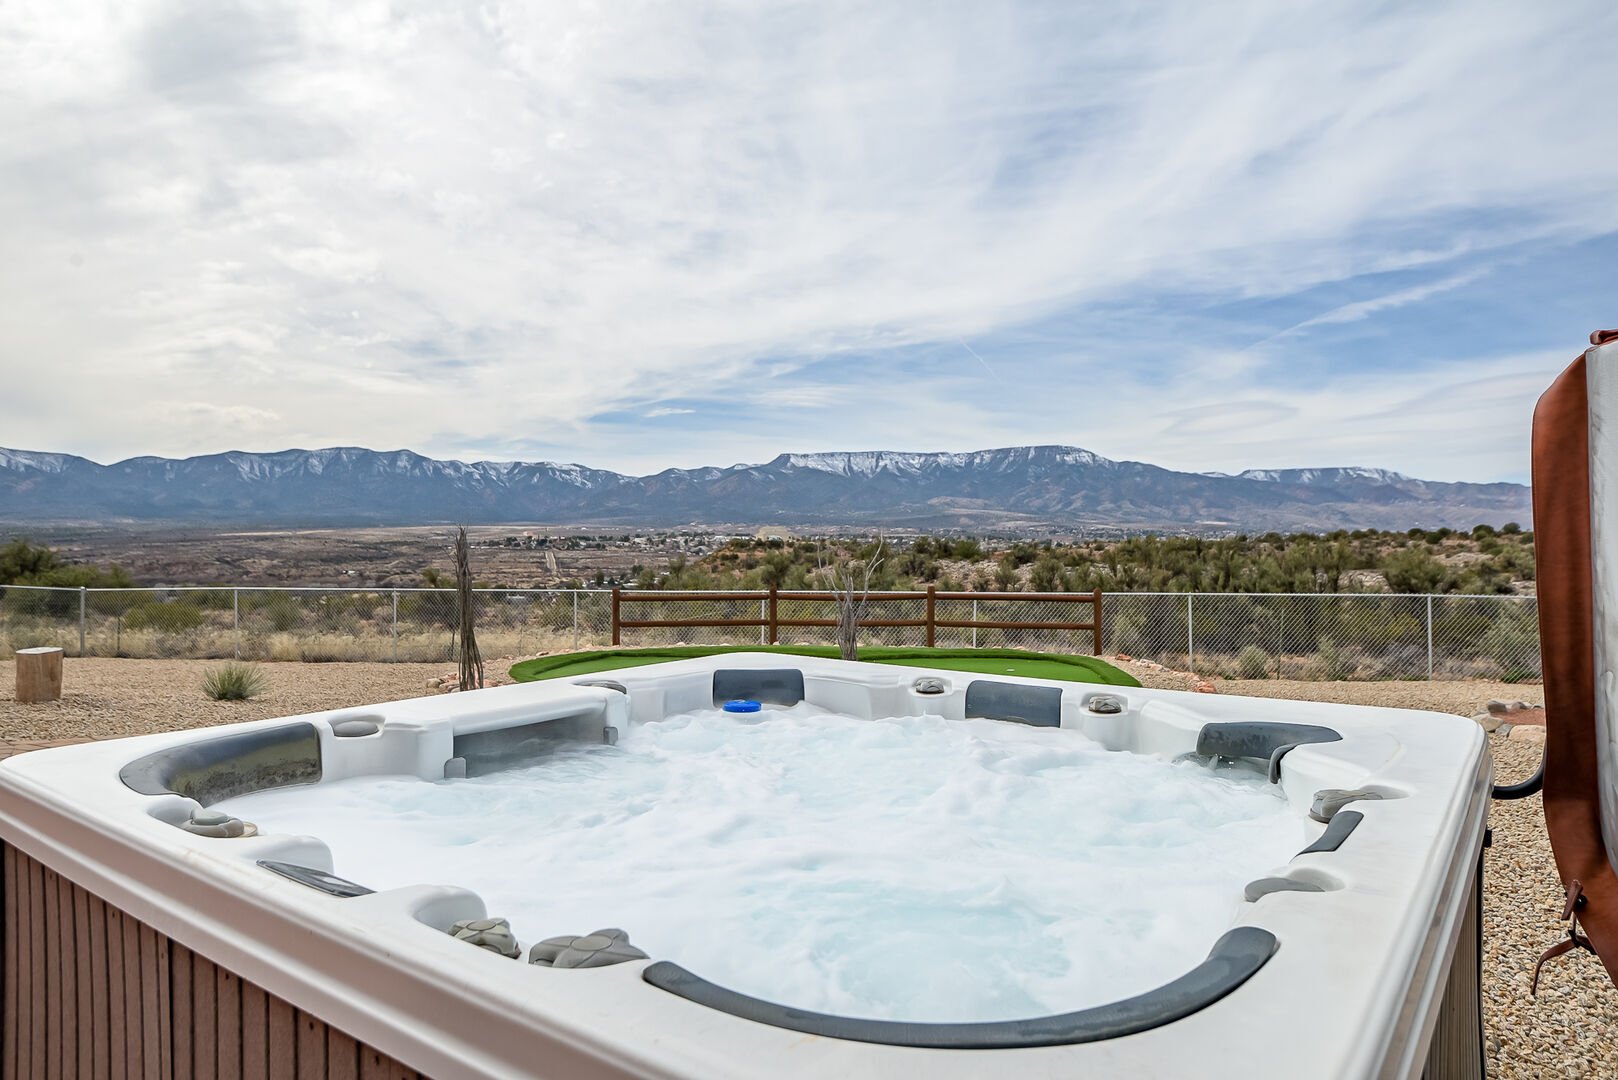 Take a Dip in the Private Hot Tub or